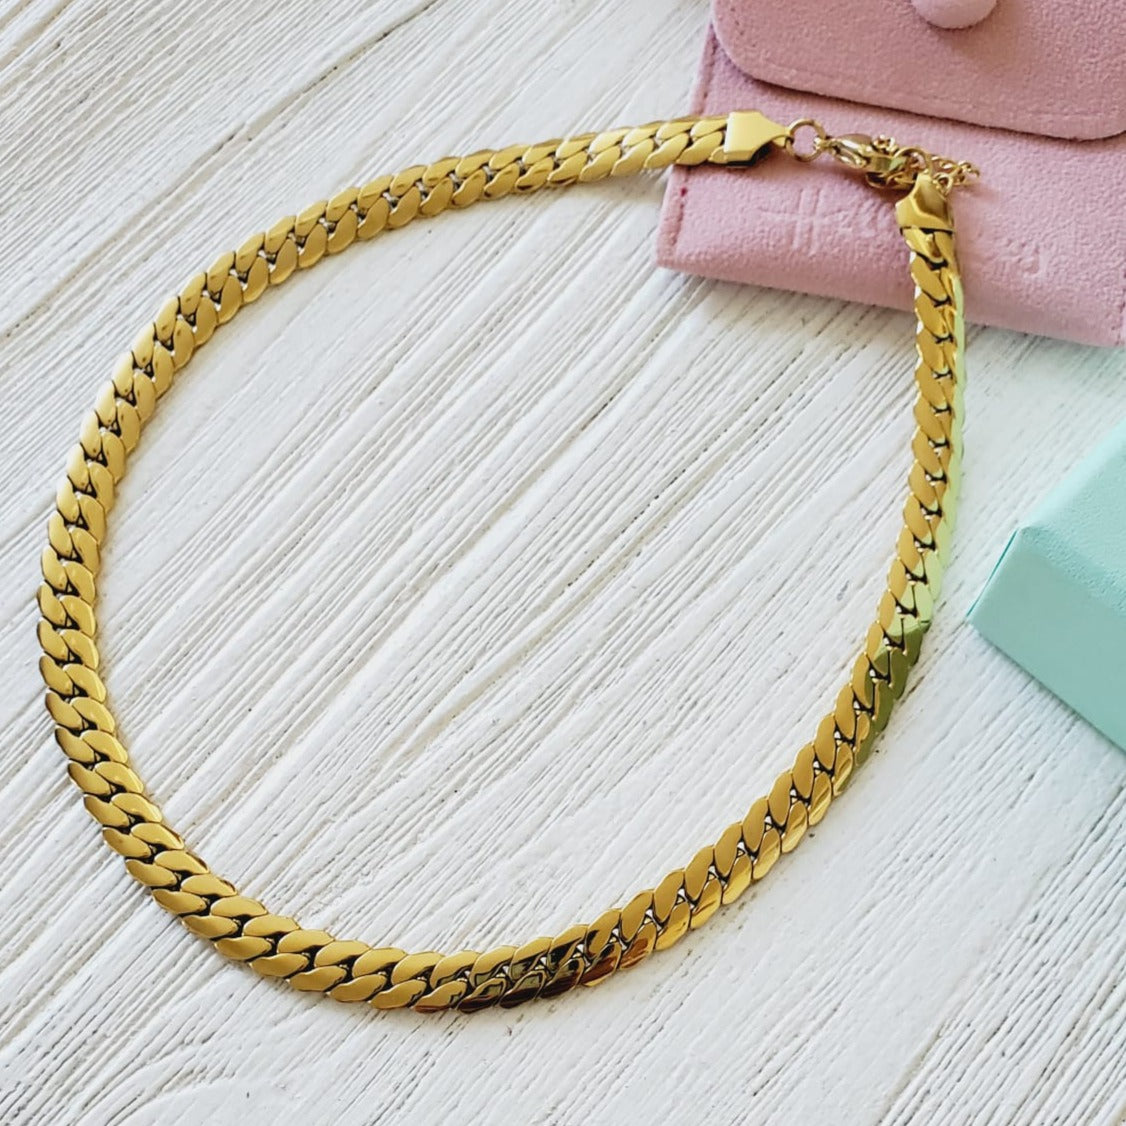 Tiger Necklace, Leo Necklace, 18k Gold Necklace, Gift for her, Gift for mom, Bold jewelry, bold necklace, paperclip necklace, dainty jewelry, vintage jewelry, gold jewelry, goldfilled jewelry, water resistant jewelry, water resistant necklace, horn necklace